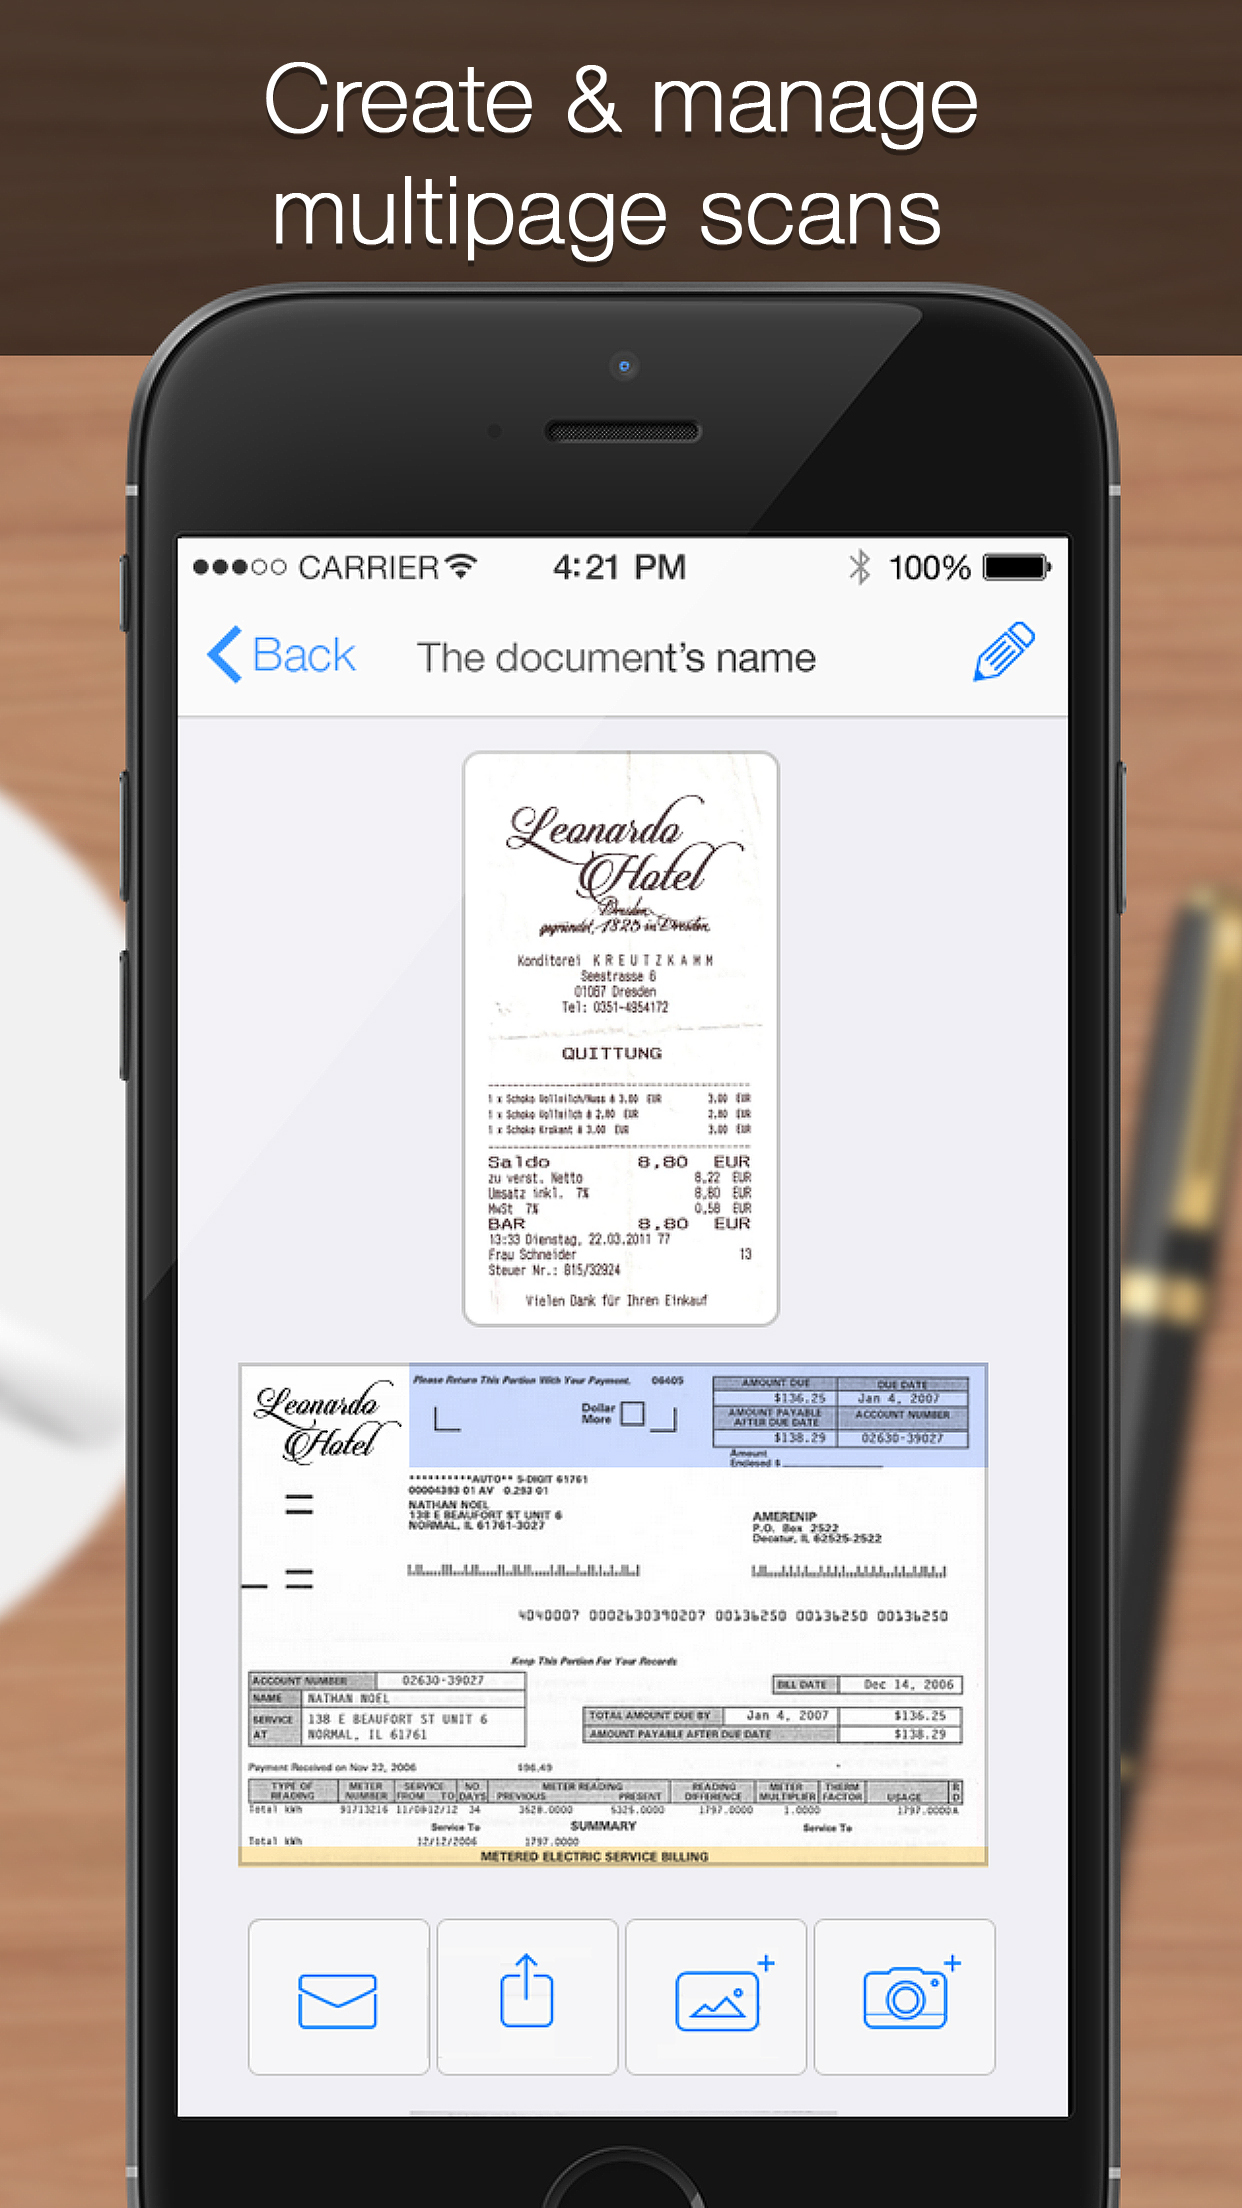 iScanner Pro - Mobile PDF Scanner to Scan Documents, Receipts, Biz Cards, Books screenshot-3